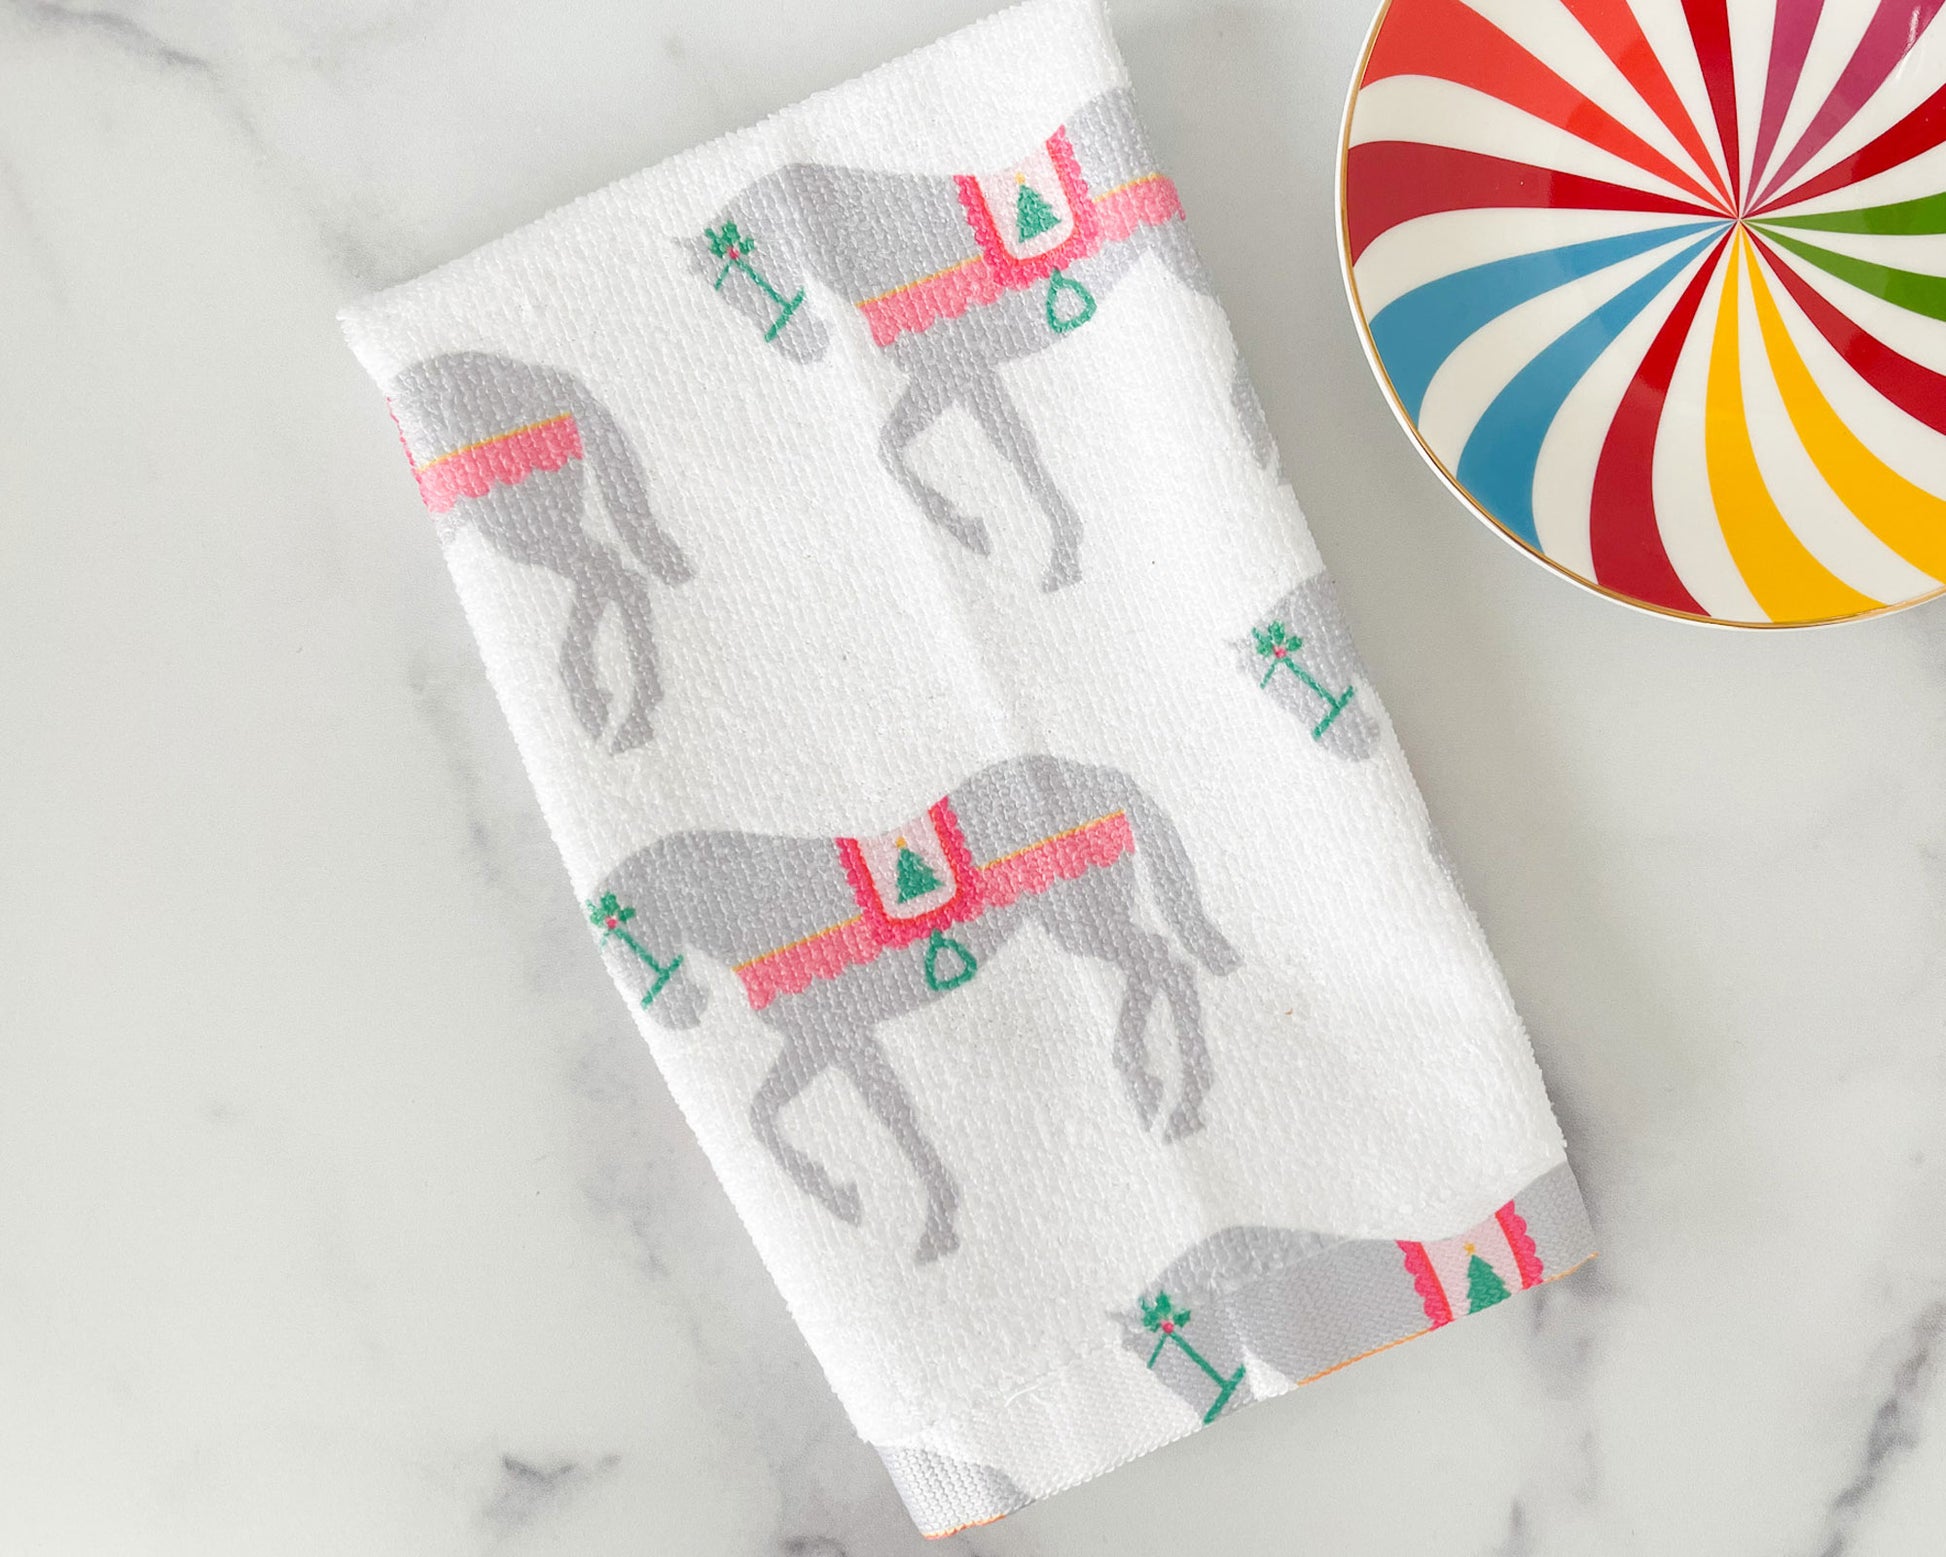 Christmas horse holiday hand towel, seasonal towel for kitchen or bathroom, decorative hand towel, meredith collie paper